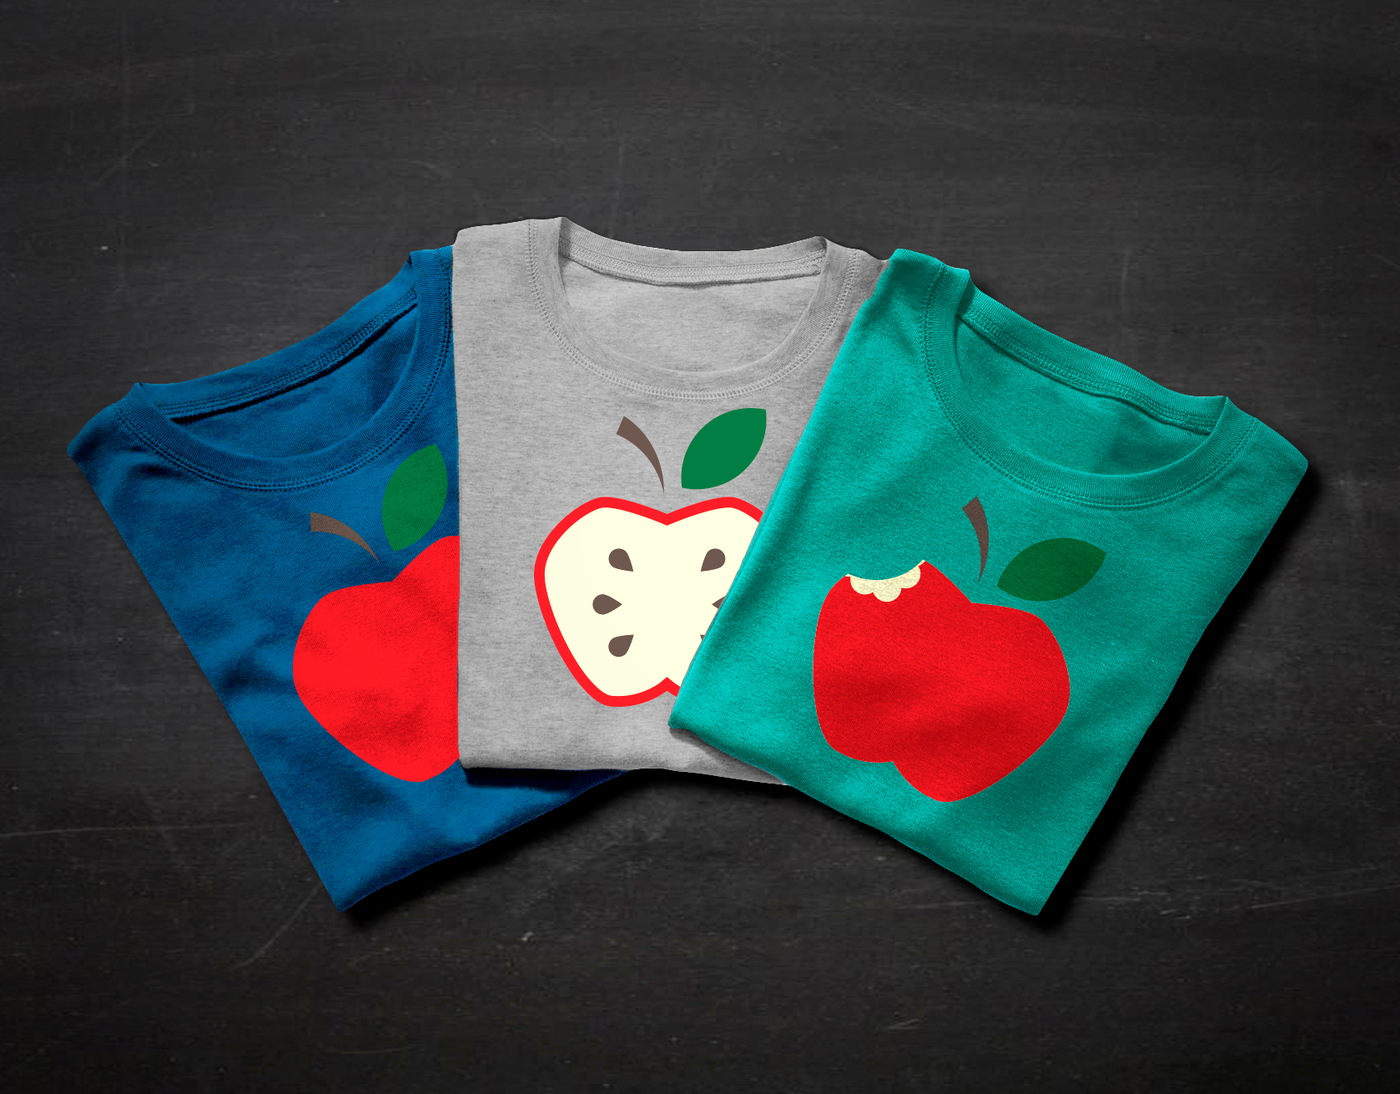 Three folded tees fanned out against a chalkboard backdrop. The left has a whole apple design, the middle has an apple that has been sliced in half to show the seeds, and the right has a design of an apple with a bite taken out.